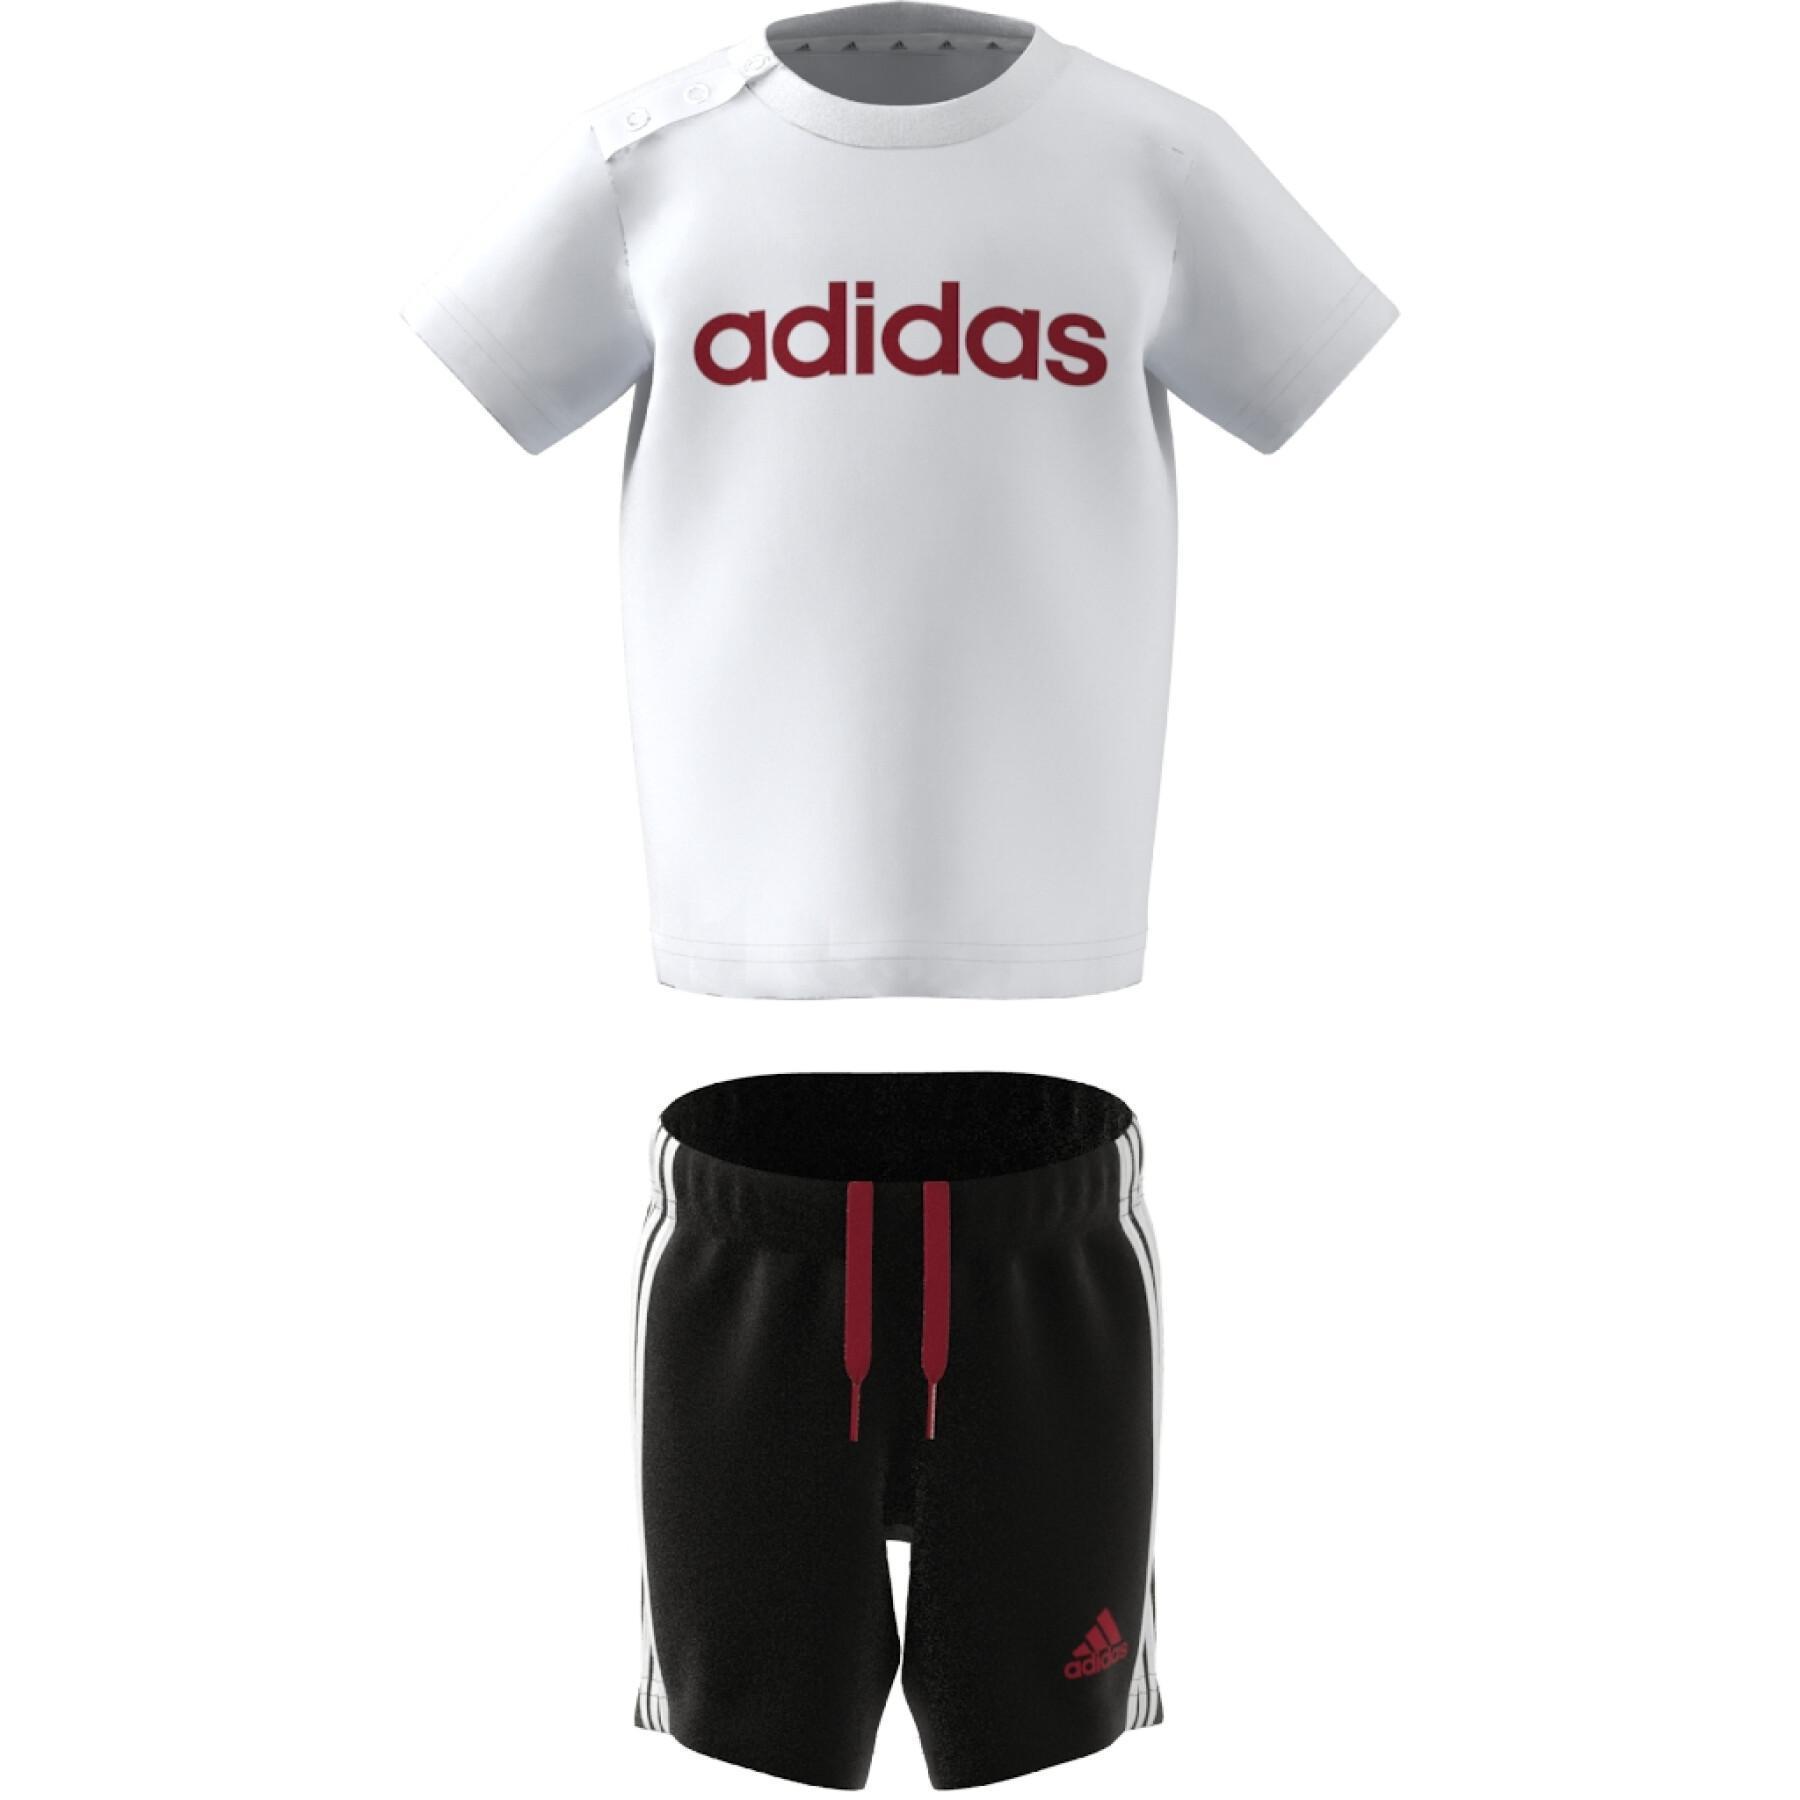 Organic cotton t-shirt and shorts set adidas 3-Stripes Essentials Lineage -  adidas - Brands - Lifestyle